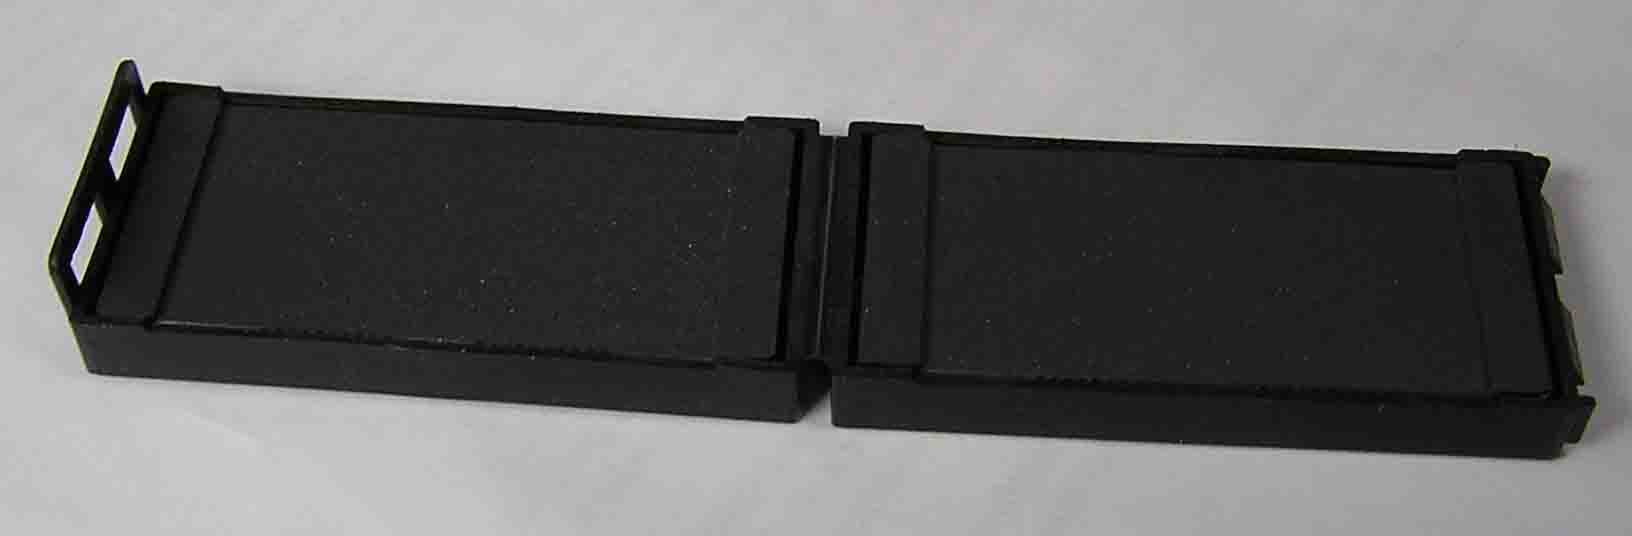 Folding Ferrite (6 pcs used as core material to improve coupling